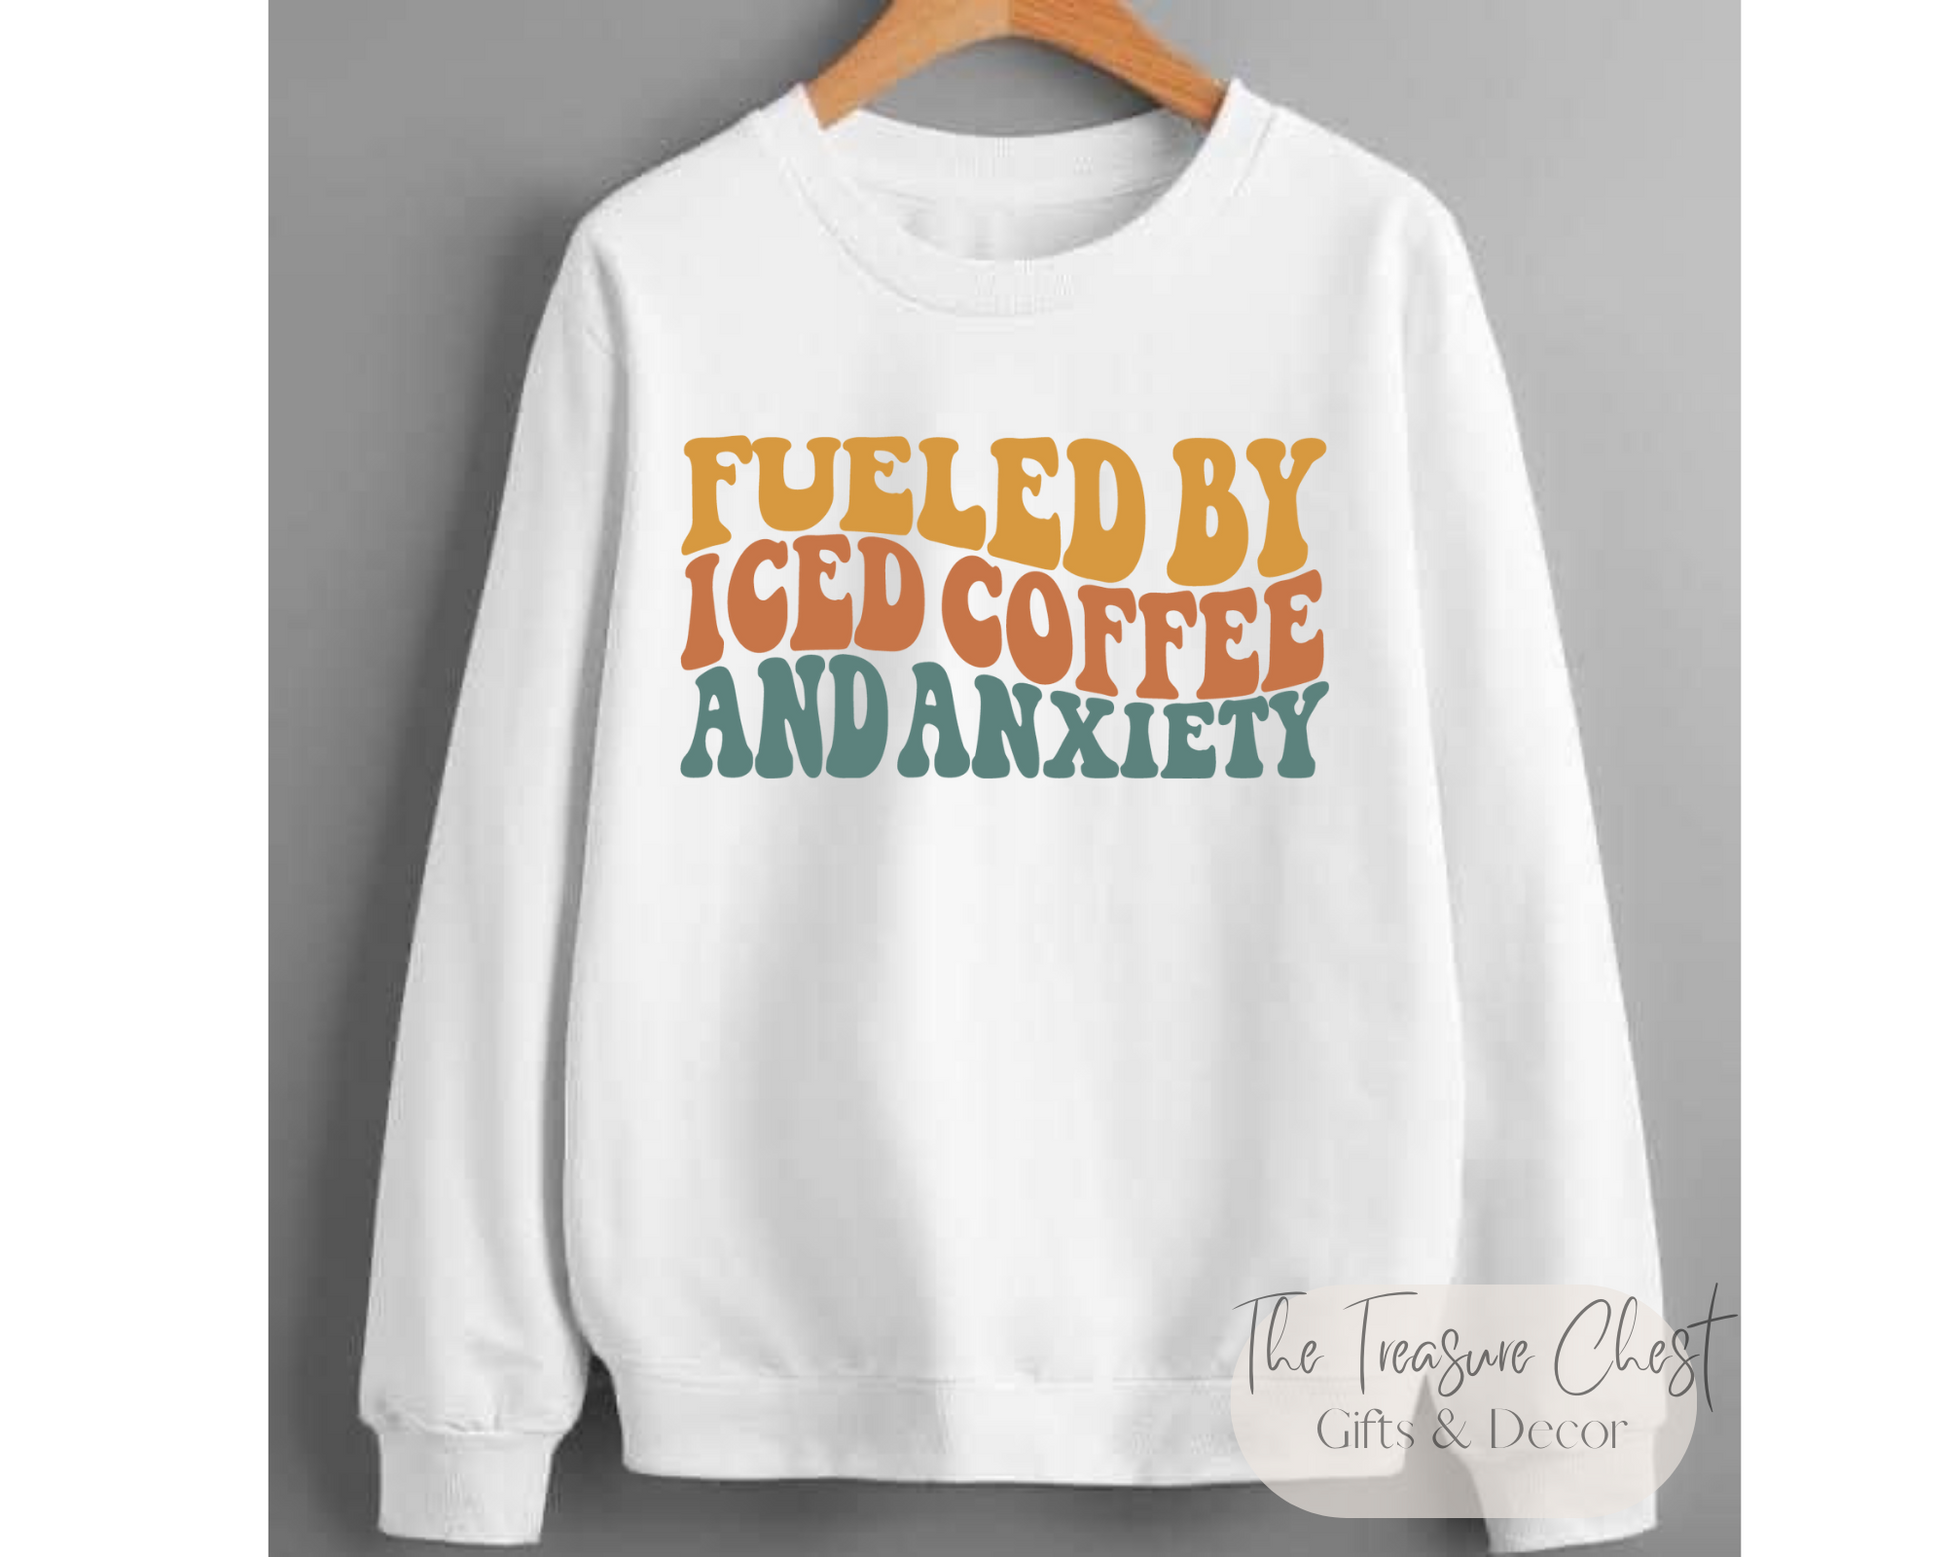 This Fueled By Iced Coffee and Anxiety Crewneck Sweatshirt is the perfect blend of comfort, style and humour. It features a design on the front that reads "fueled by iced coffee & anxiety" in bold neutral coloured lettering. The warped lettering adds some much appreciated dimension to this humorous sweatshirt. 